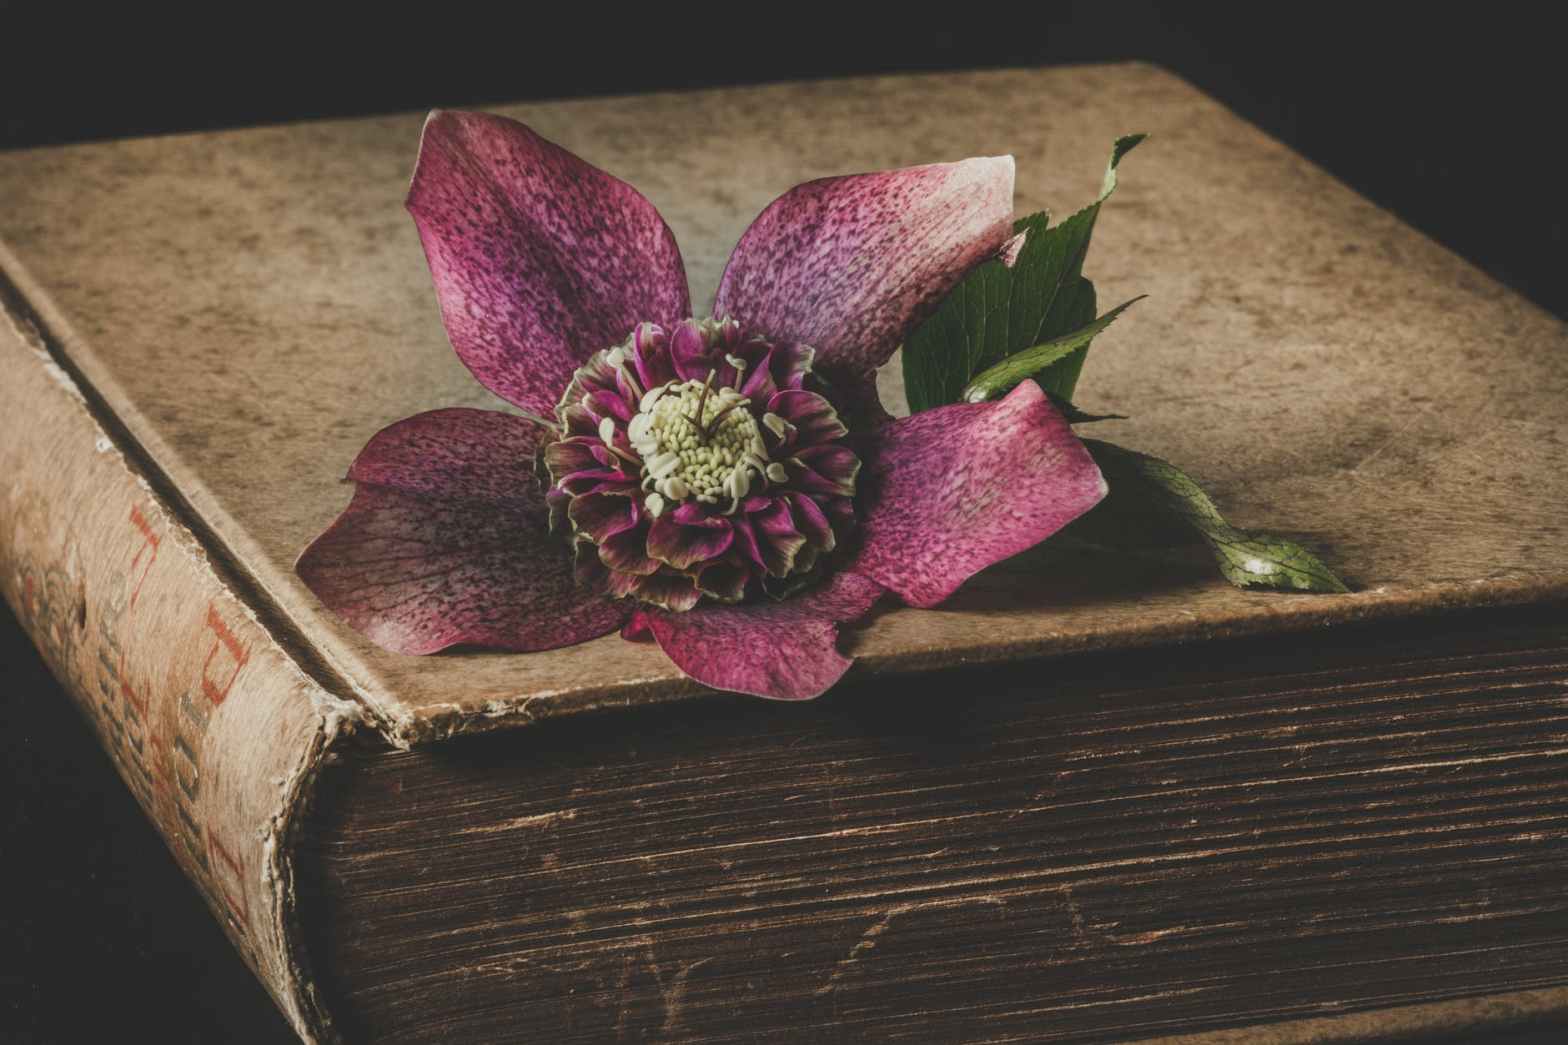 A large flower on top of an old book that is brown with age.